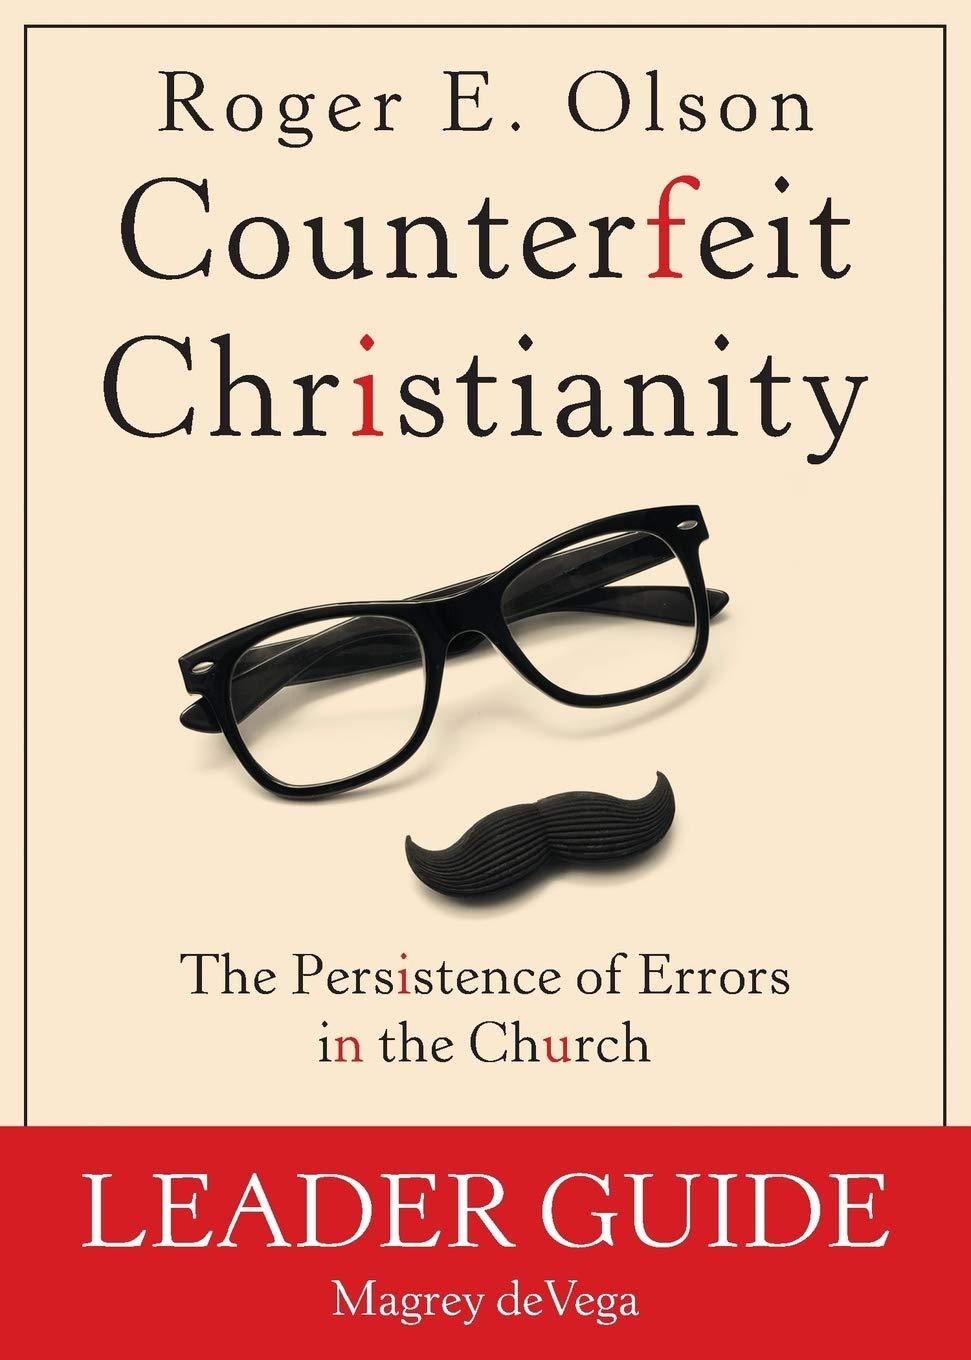 Counterfeit Christianity (Leader Guide) ( Counterfeit Christianity )